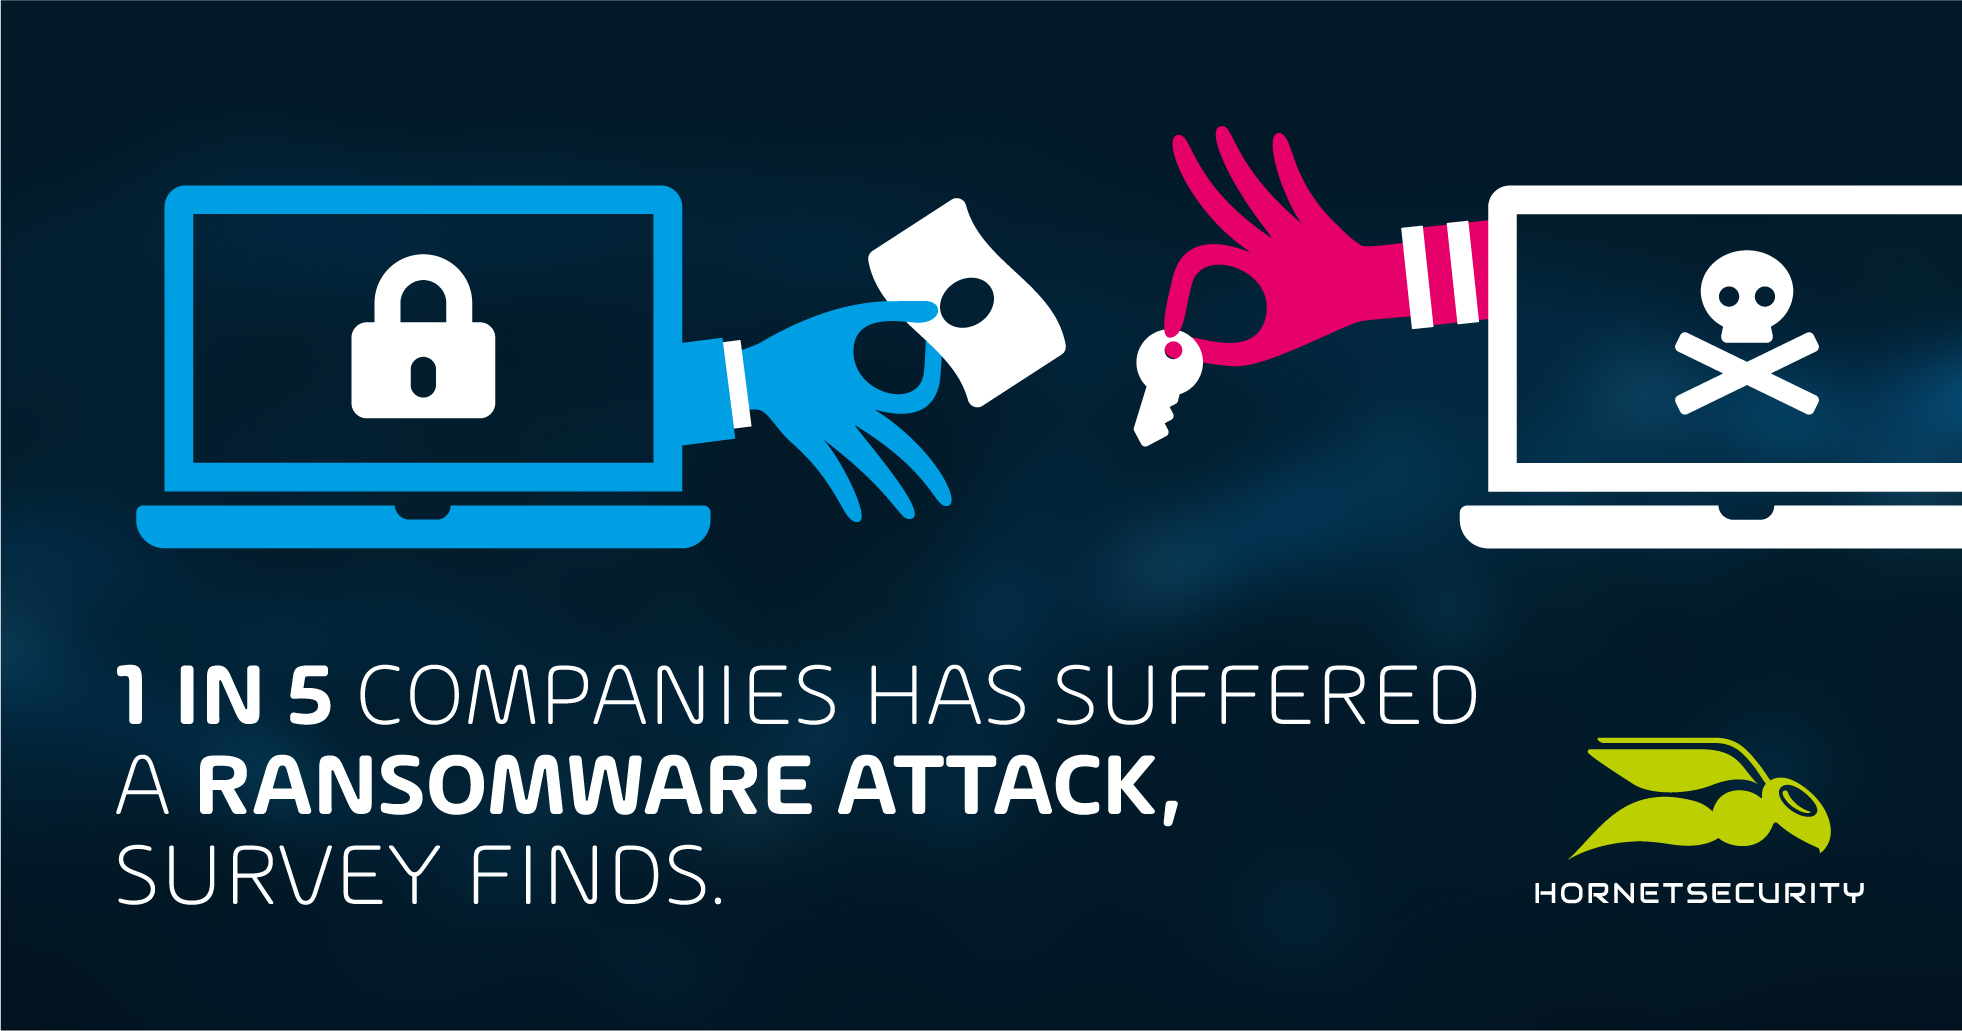 1 in 5 companies has suffered a ransomware attack, survey finds